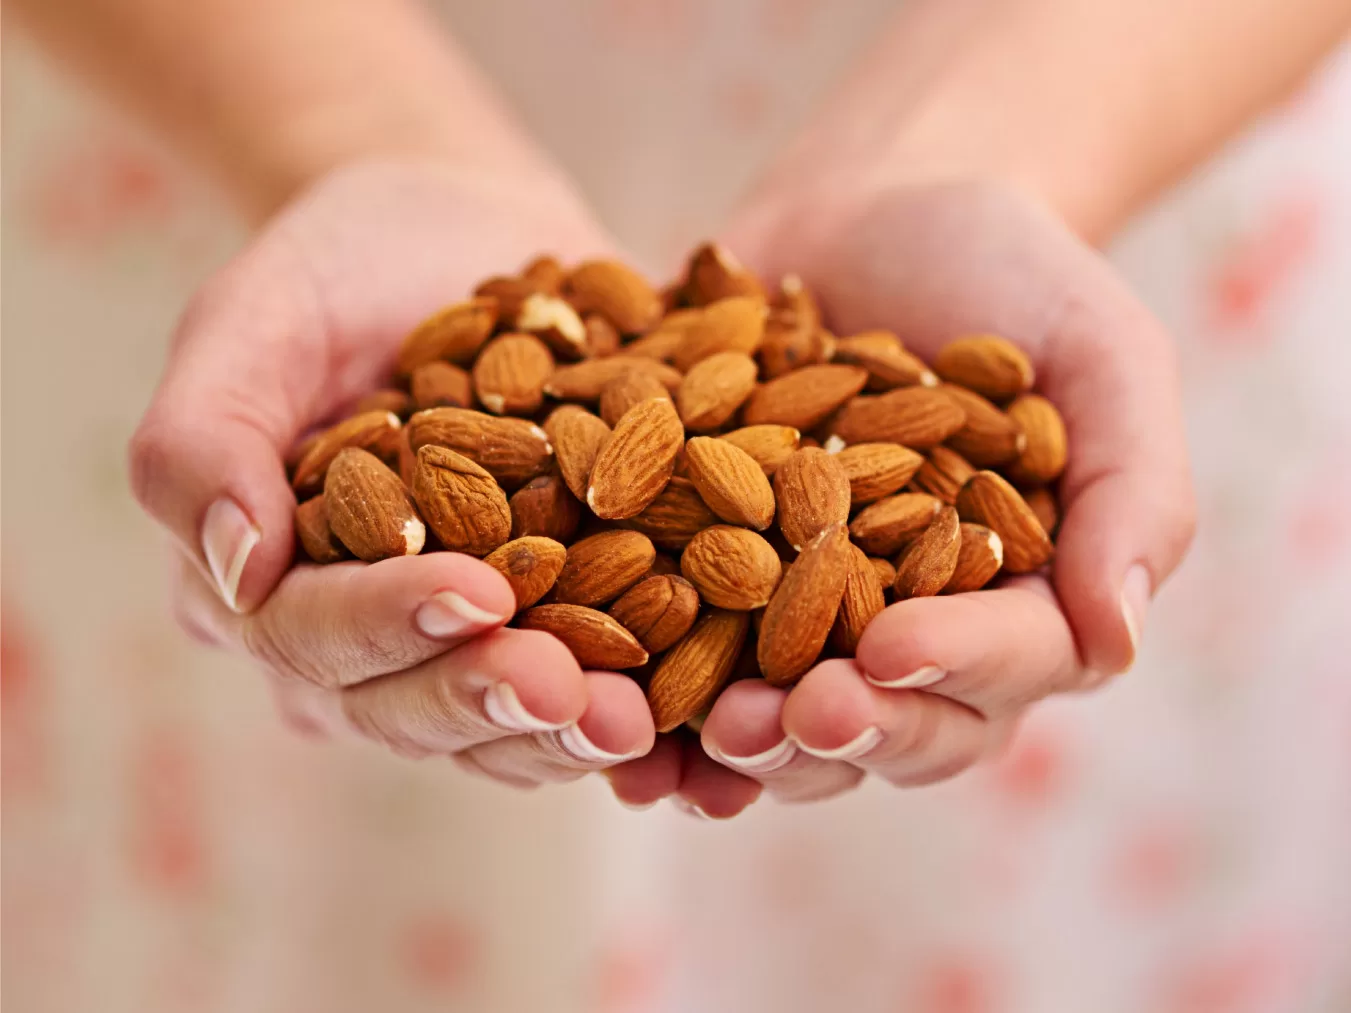 Health Boost in Every Bite: Buy Almonds for Your Well-being